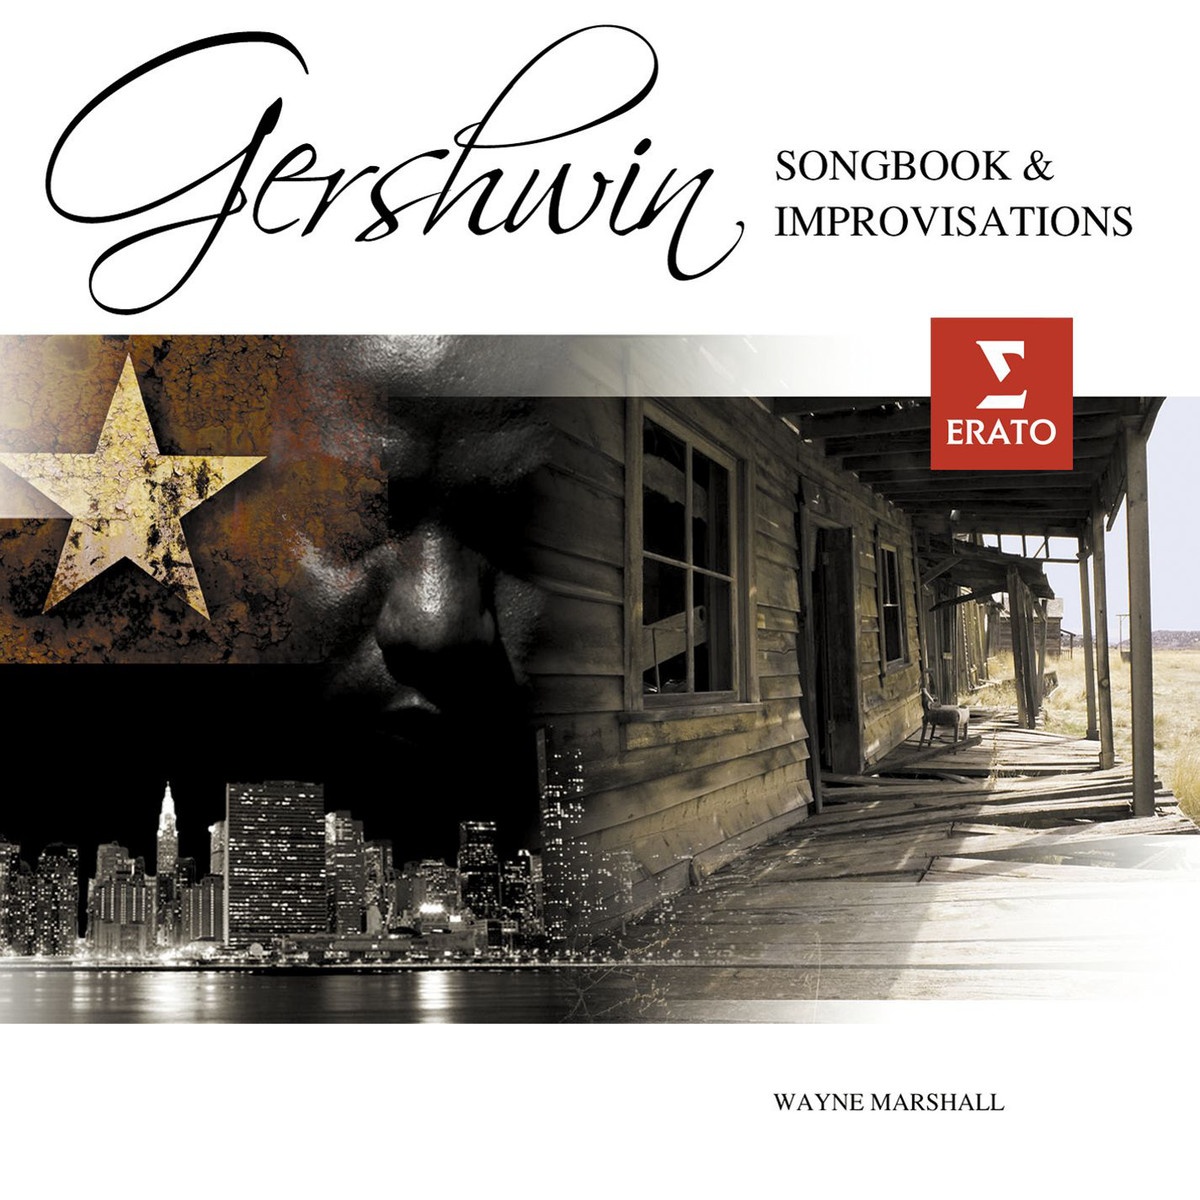 A Gershwin Songbook: improvisations on songs by George Gershwin: Porgy trio (Porgy & Bess)